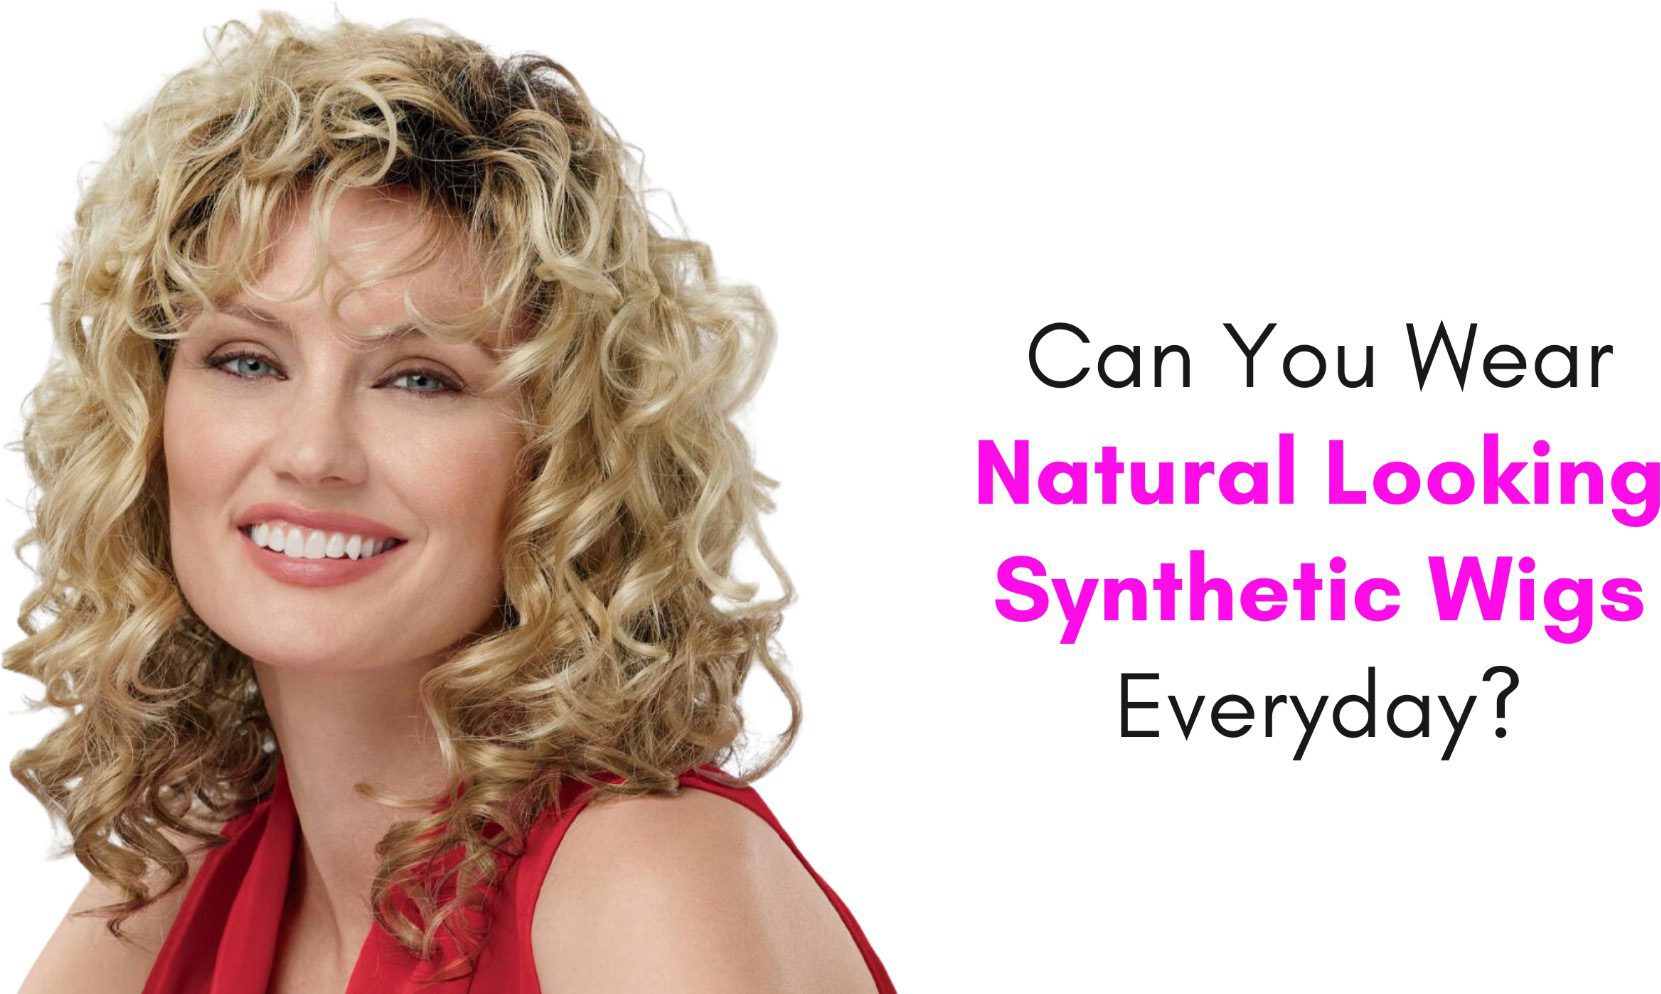 Can You Wear Natural Looking Synthetic Wigs Everyday? | Paula Young Blog